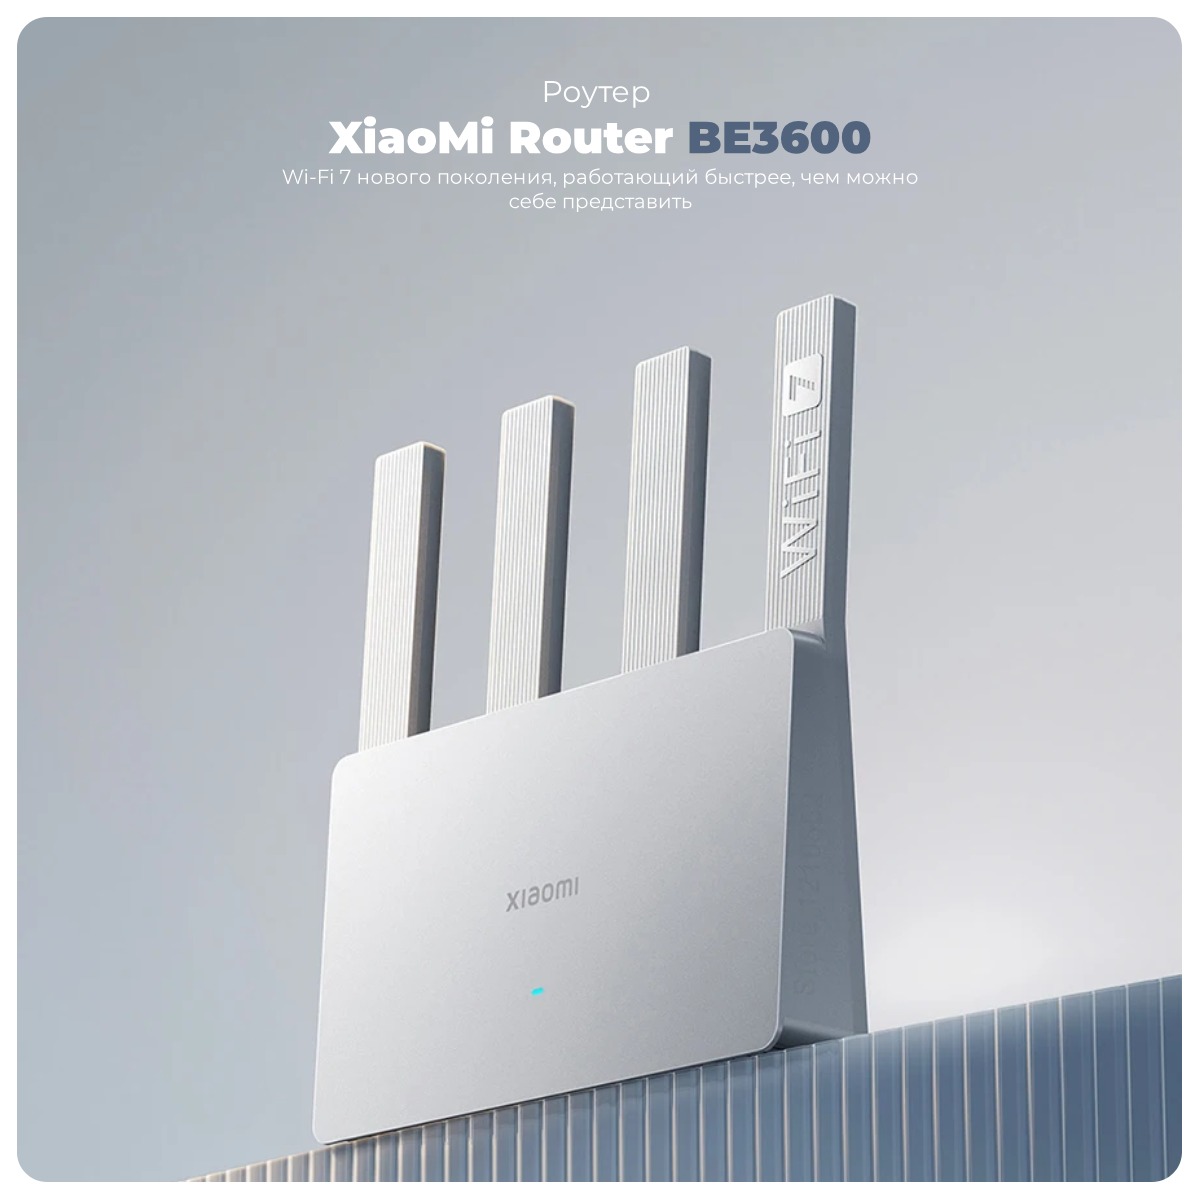 XiaoMi-Router-BE3600-01